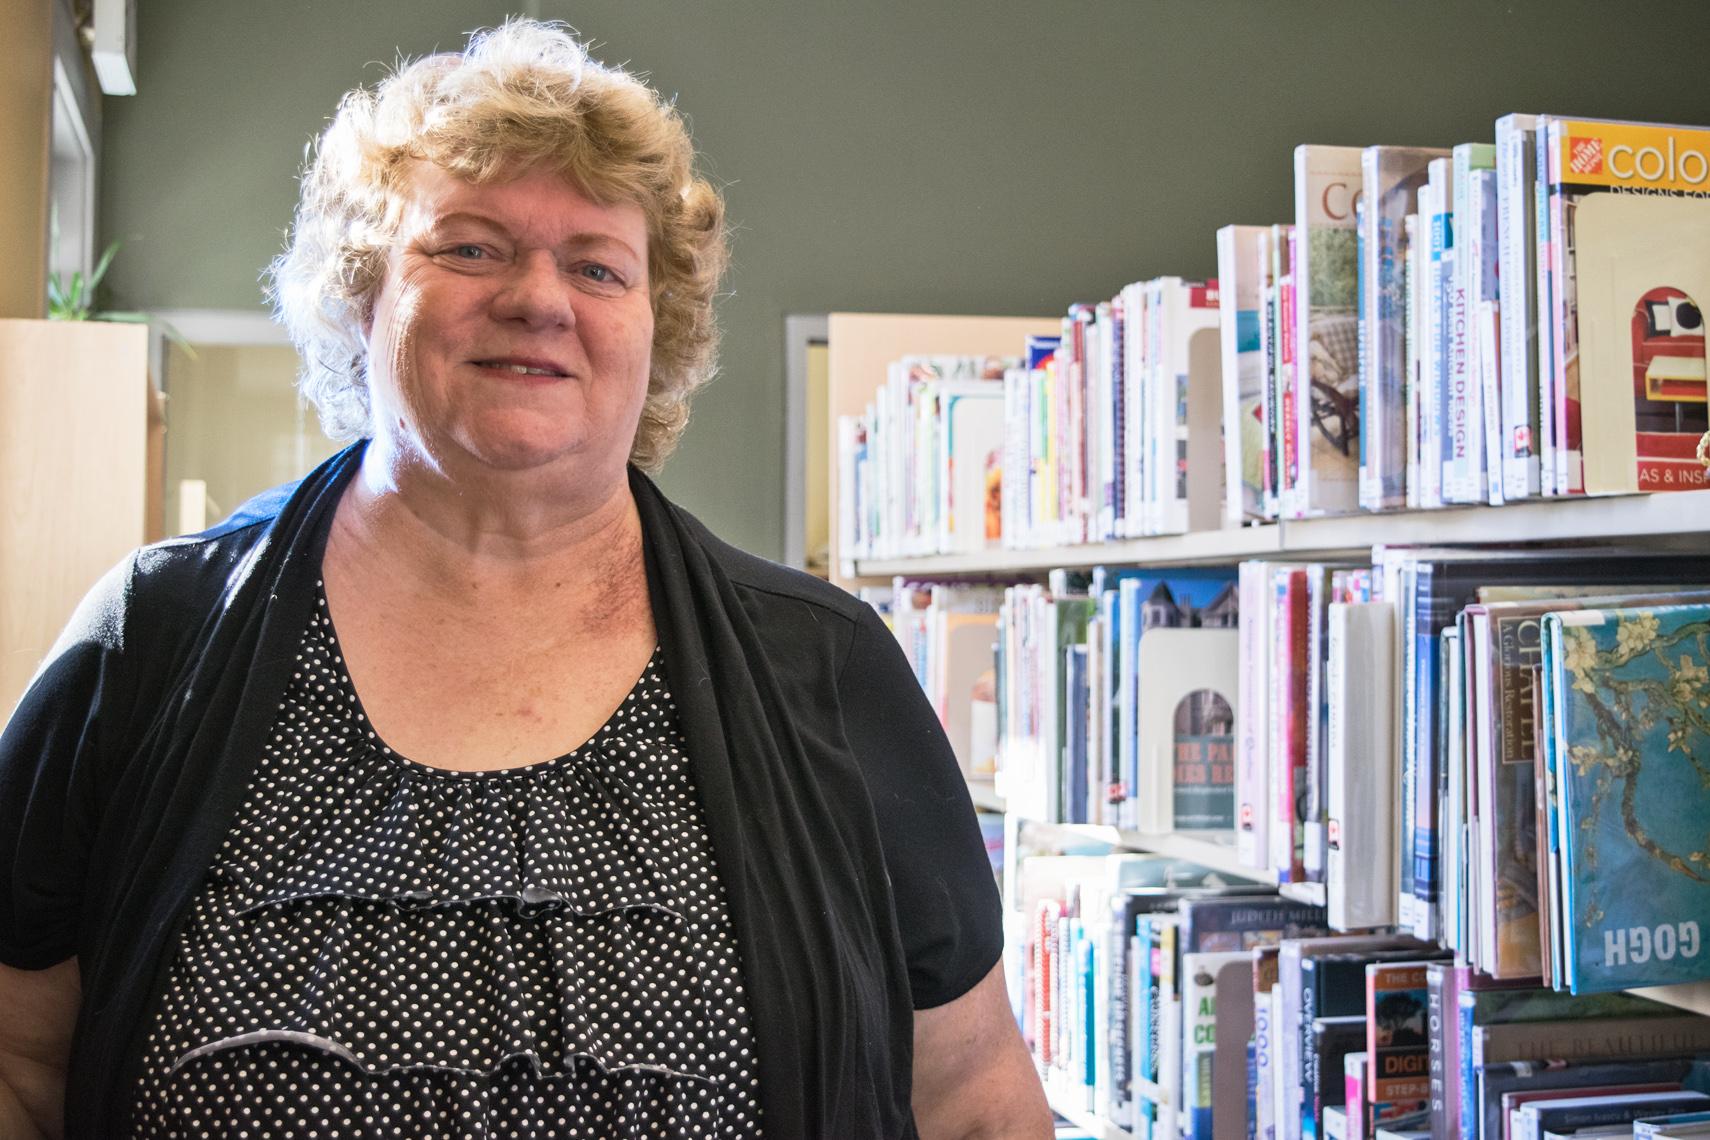 Champlain Township Public Library Head Librarian/CEO prepares for a new chapter in her life